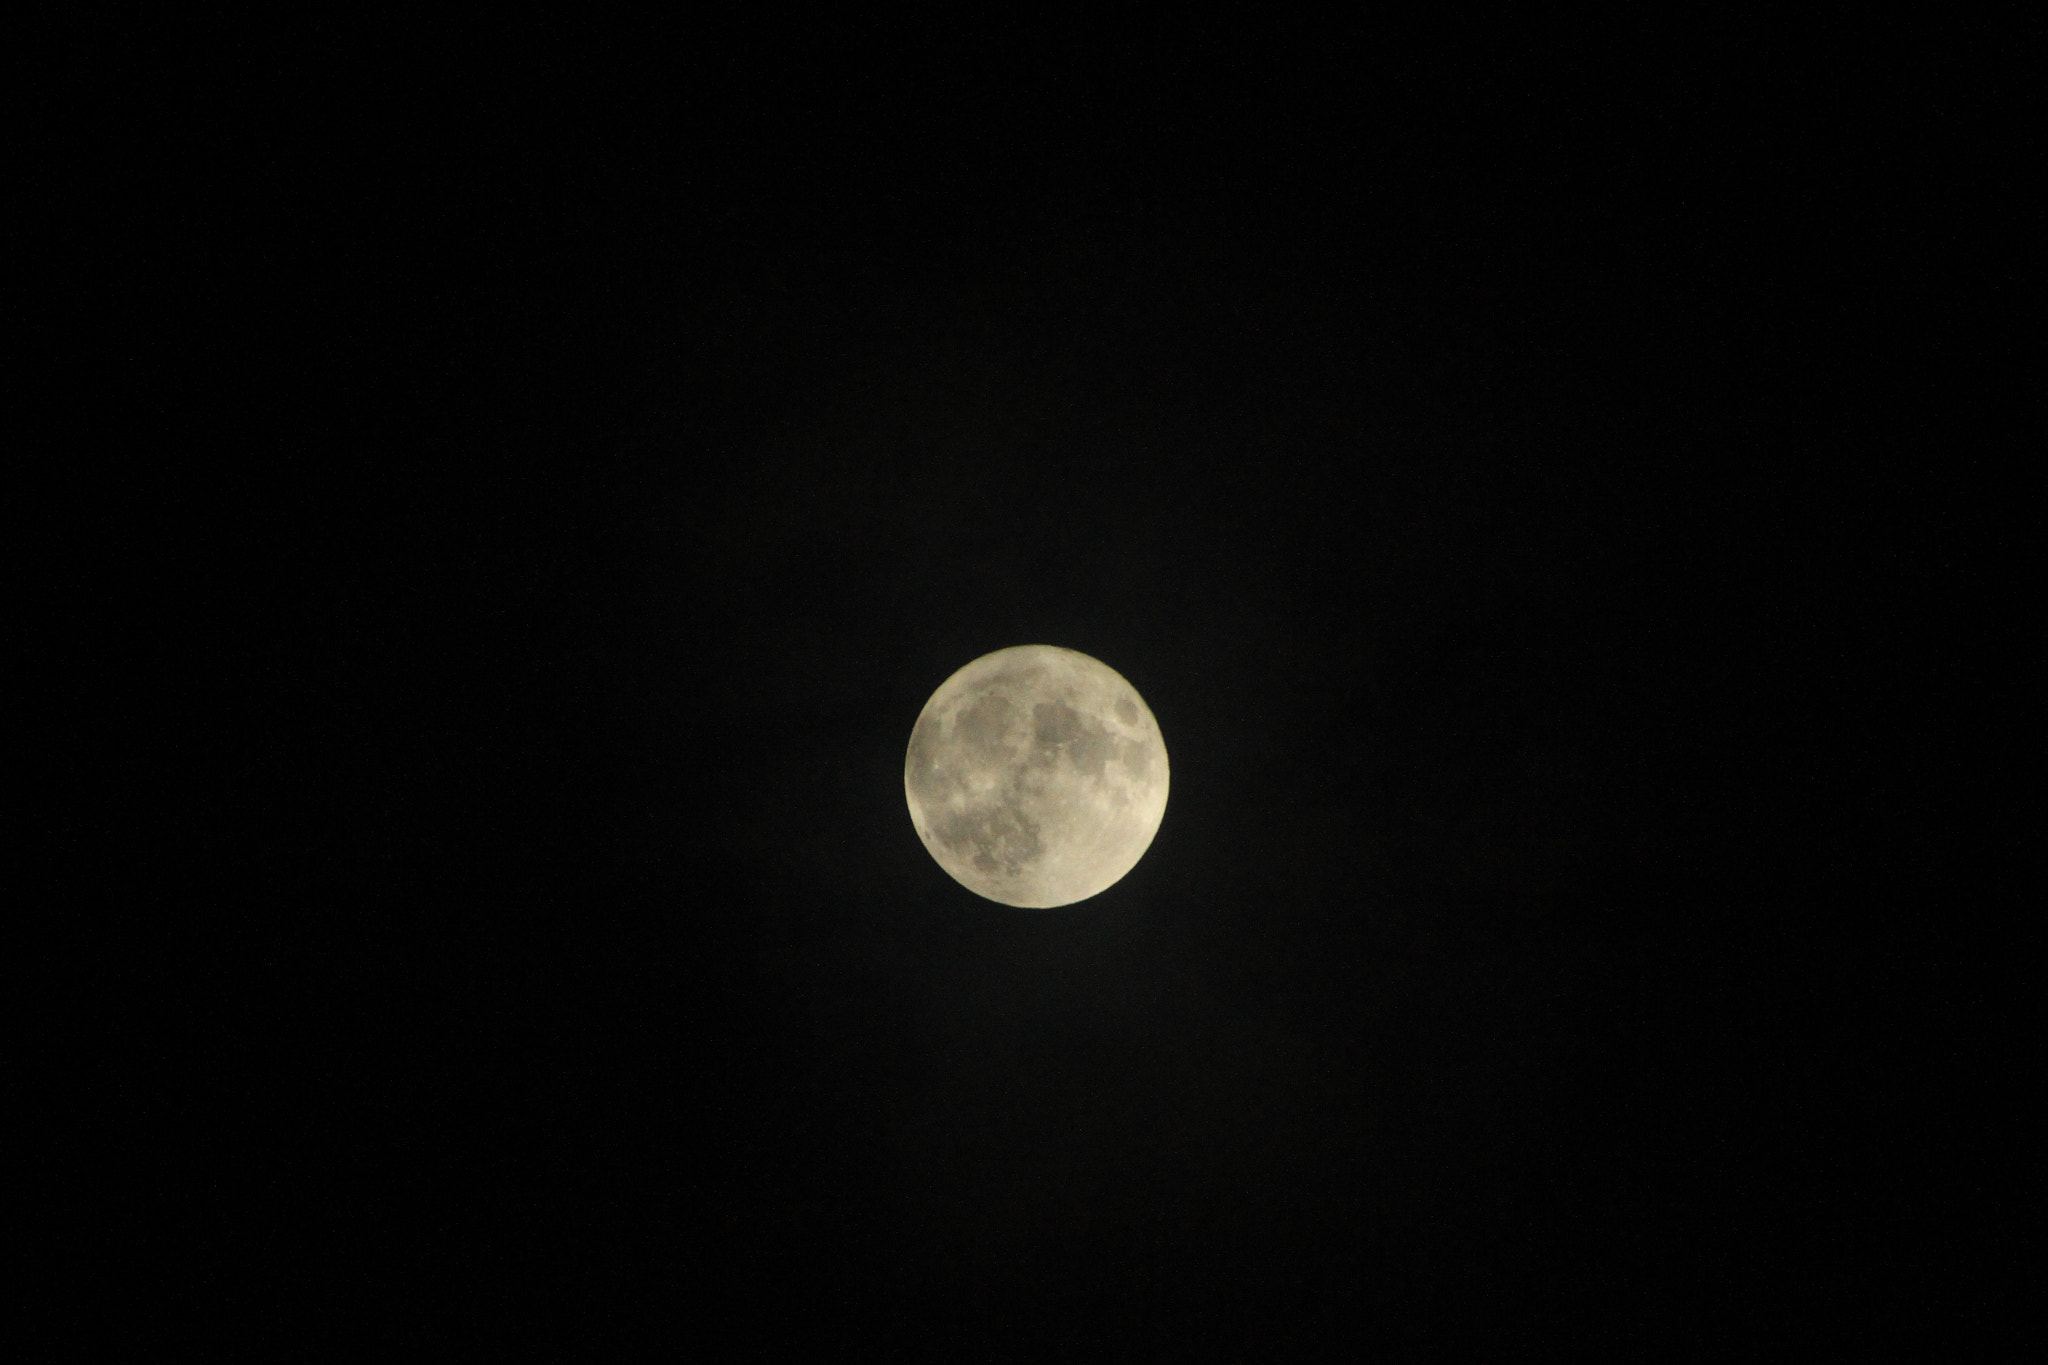 Canon EOS 7D + Canon TAMRON 16-300mm F/3.5-6.3 Di II VC PZD B016 sample photo. The super moon that was photography